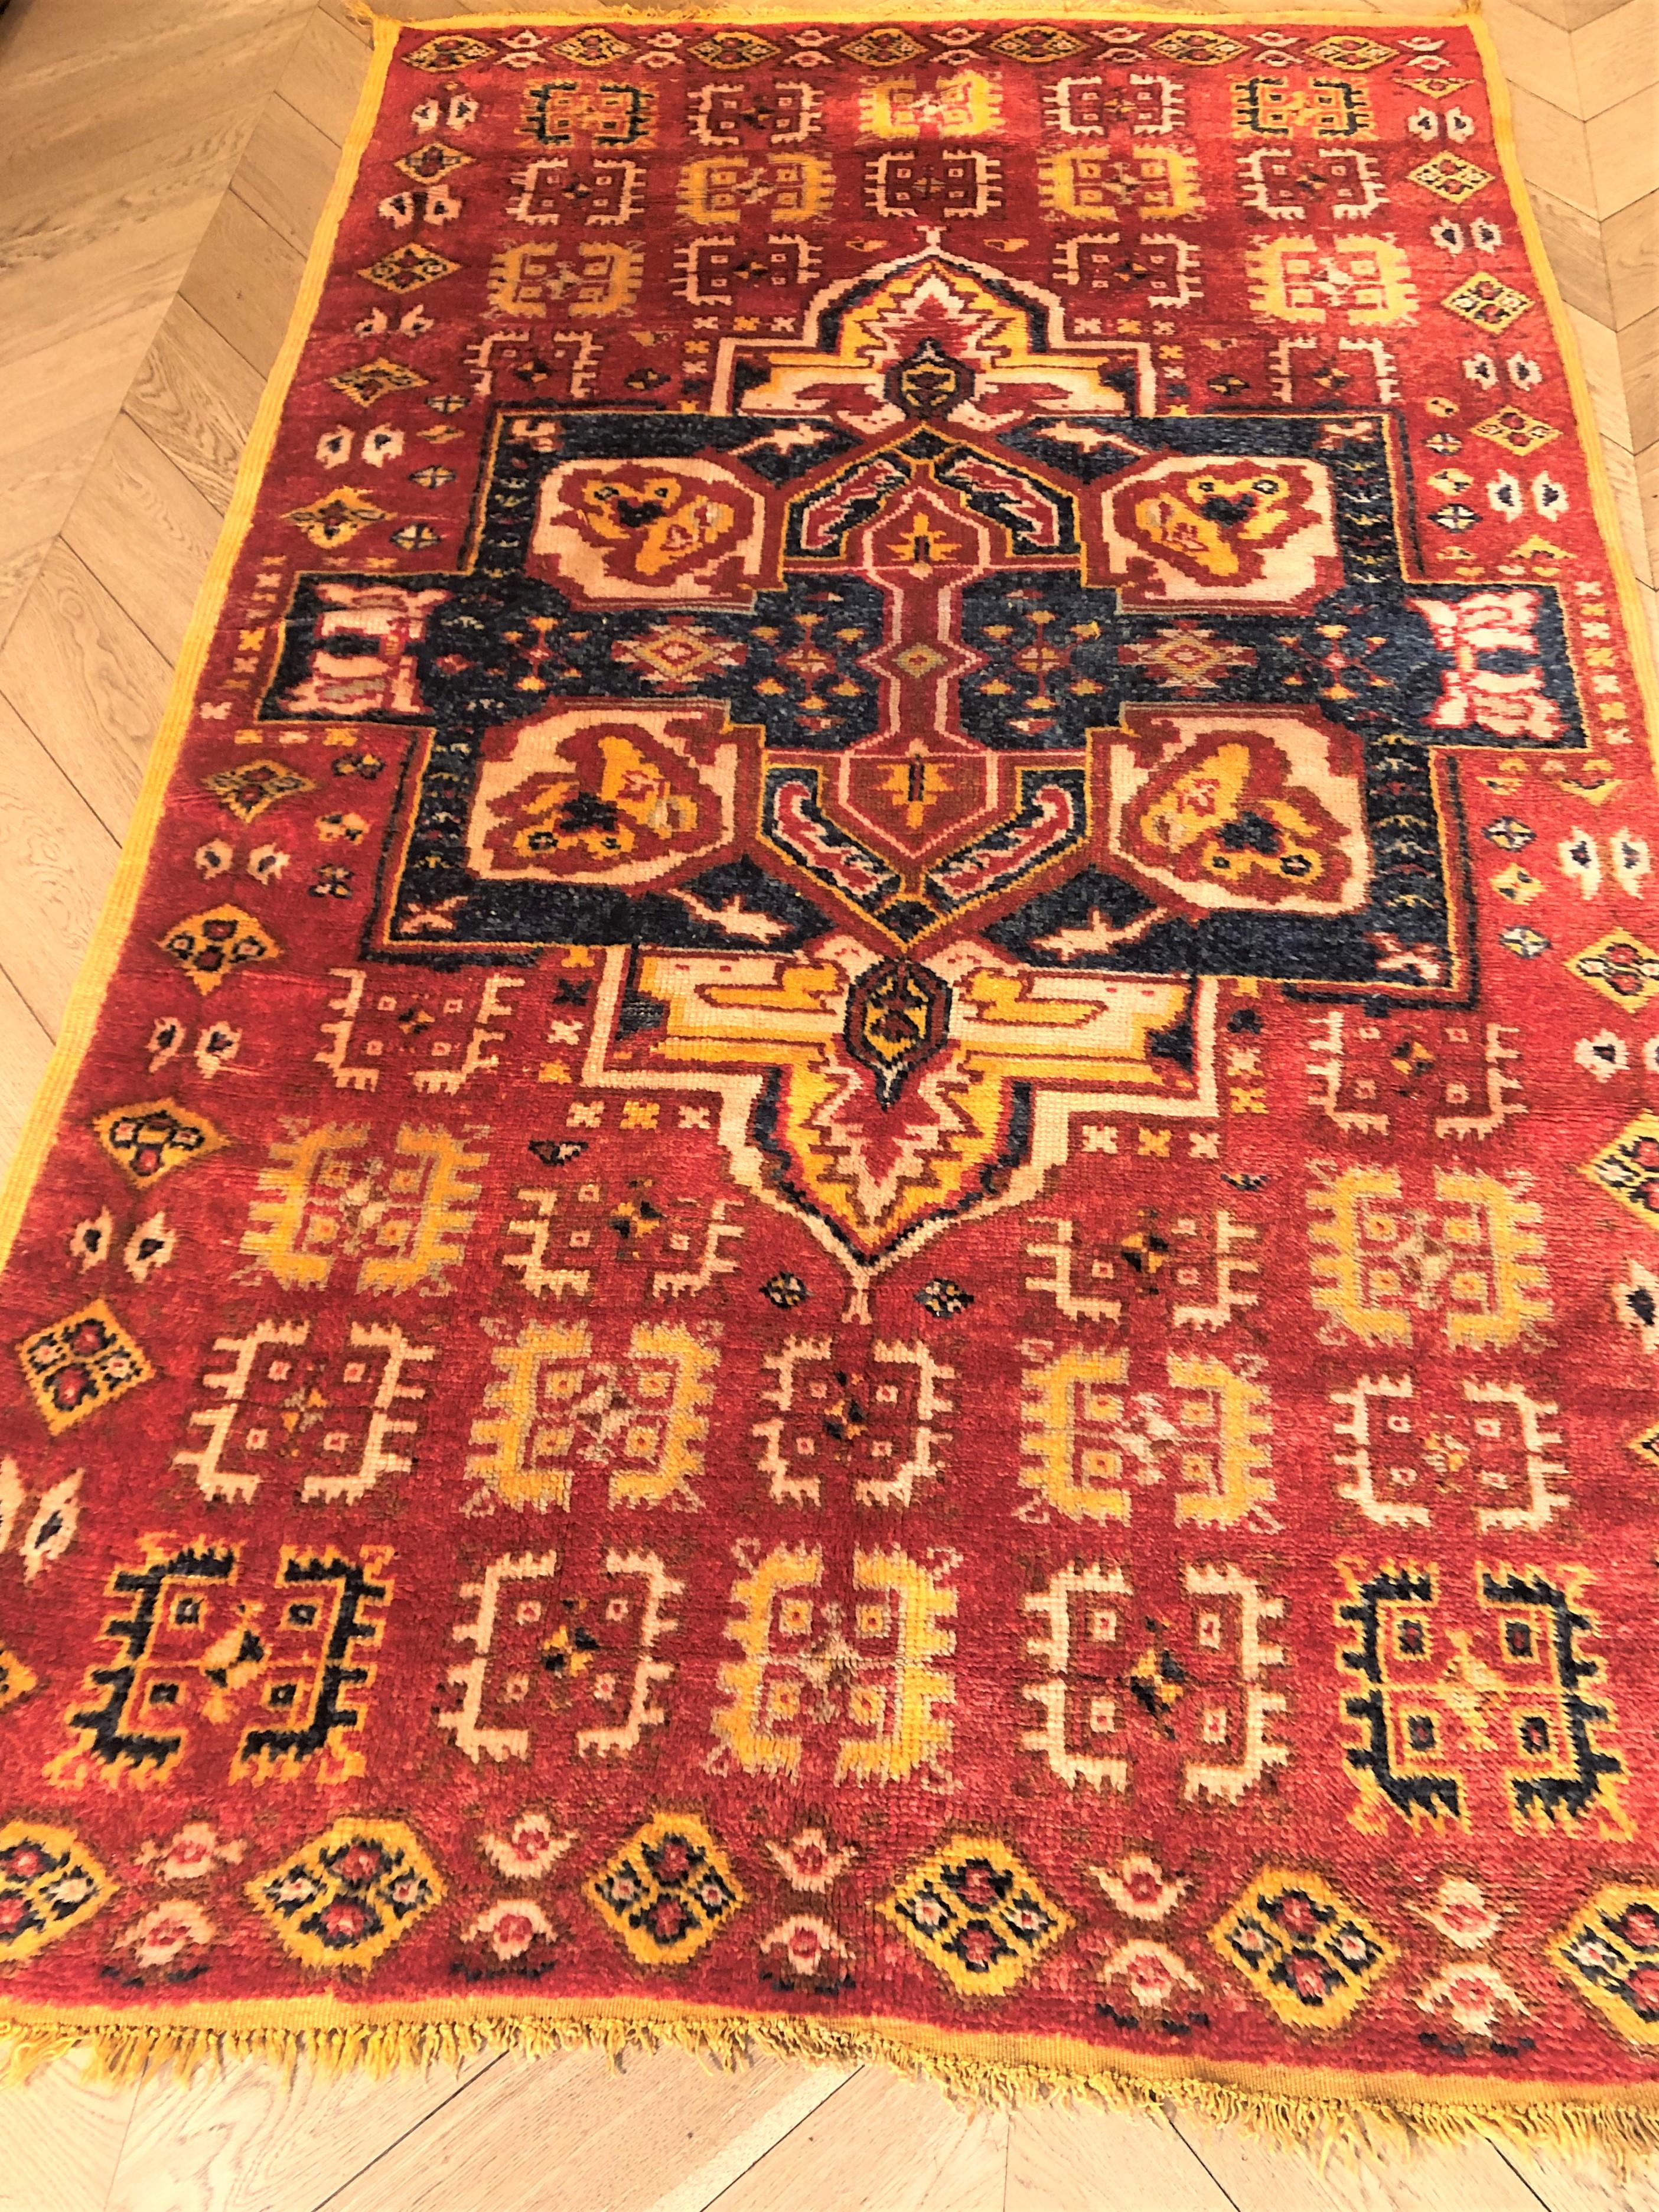 This Berber carpet from the Ouarzadeh region has the characteristic saffron-colored wool structure. The large blue medallion is not common in this typology, more often decorated with repetitive elements.
The combination of warm and bright colors is